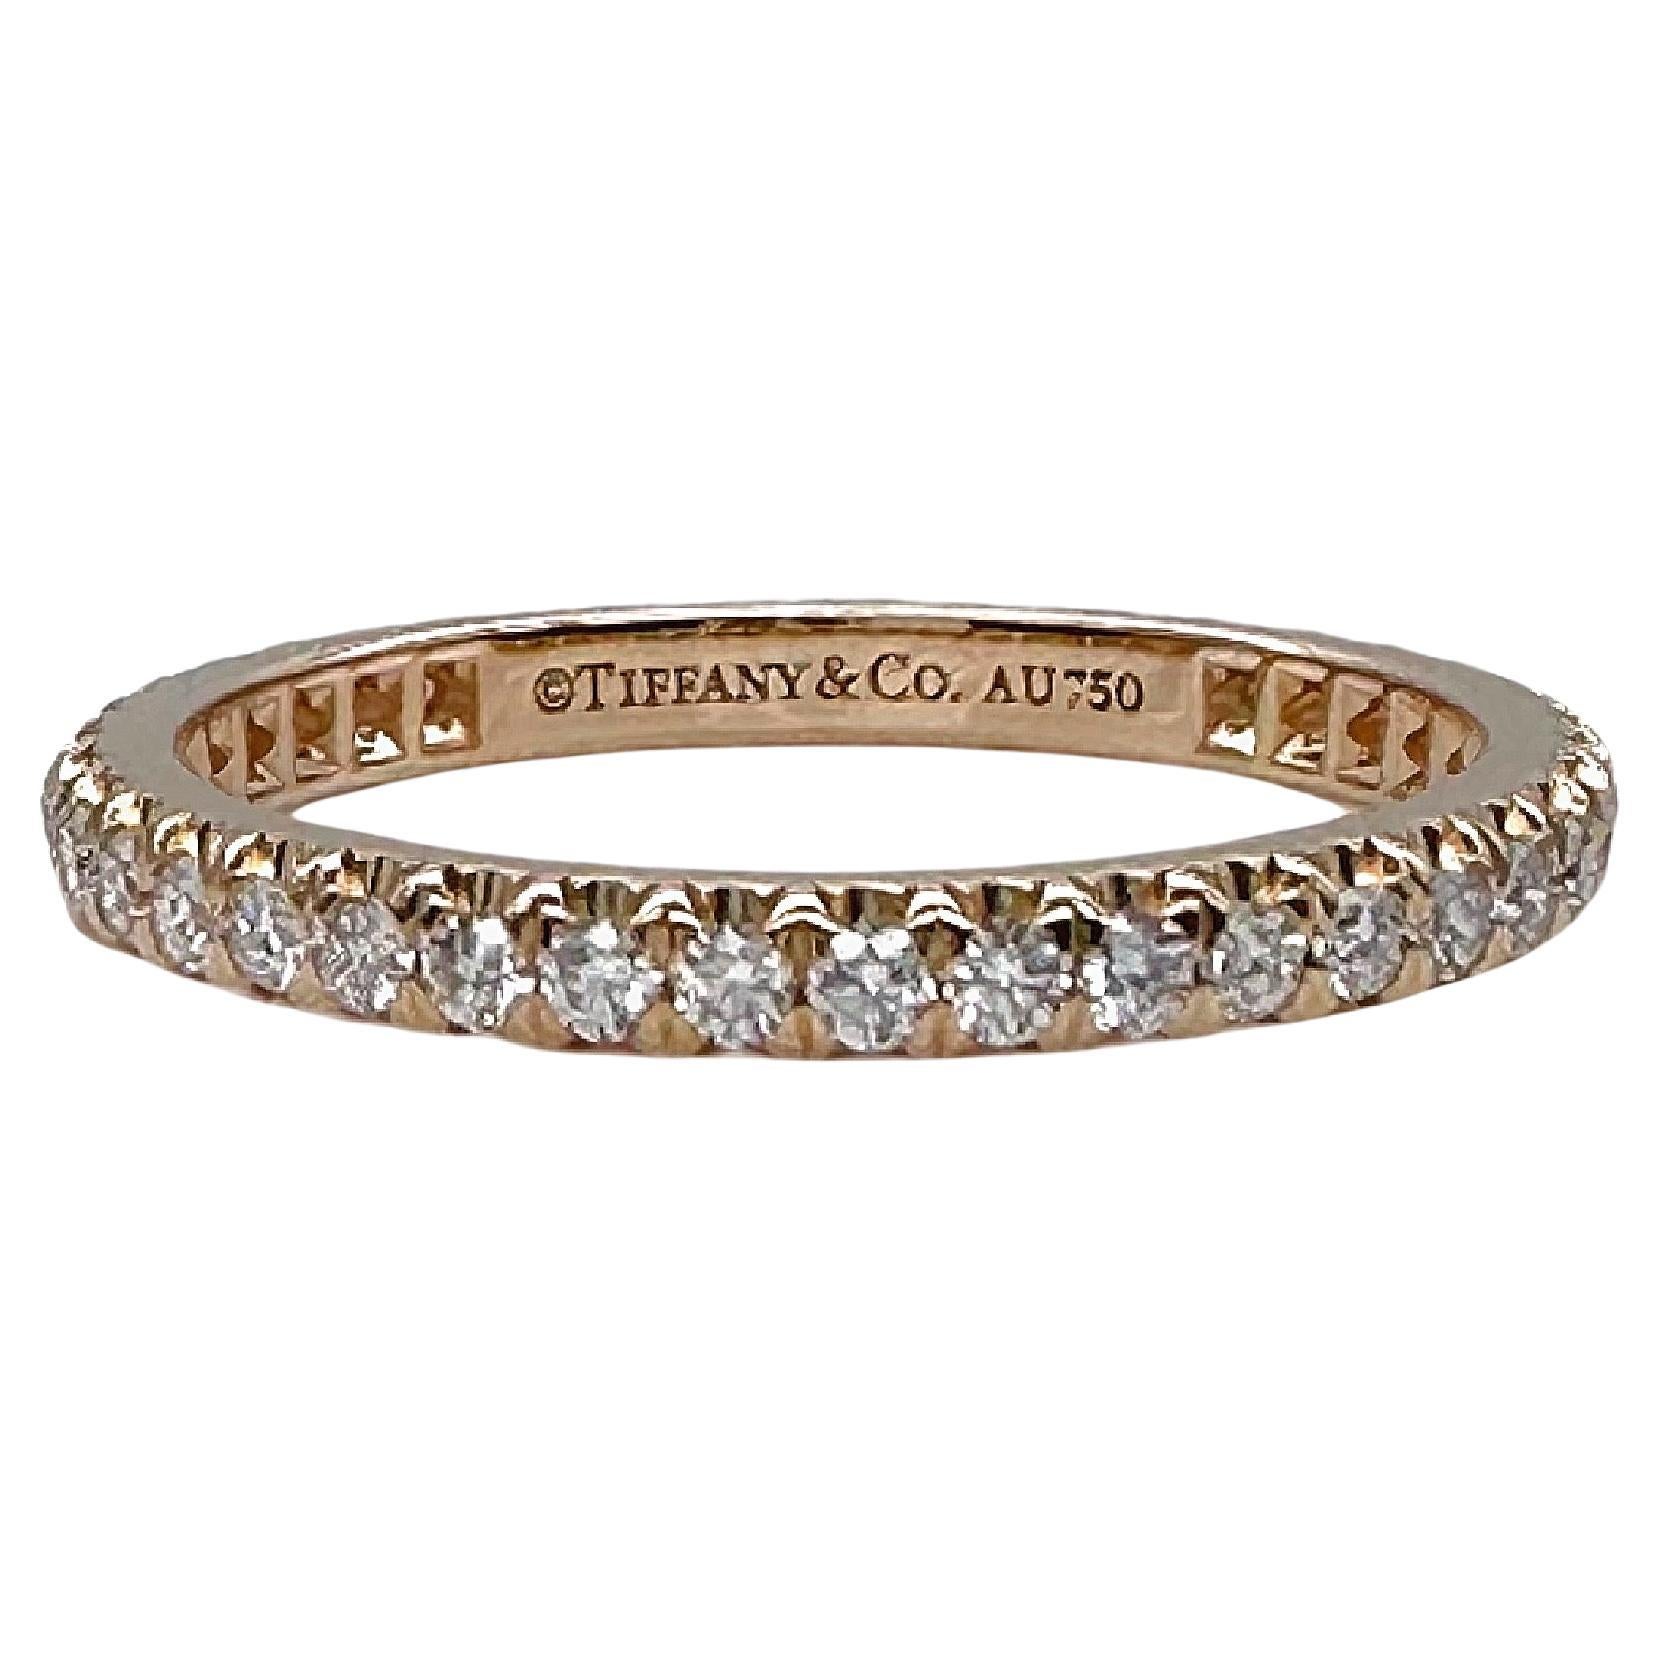 Tiffany & Co Solestes Rose Gold Voll Eternity Band Ring im Angebot